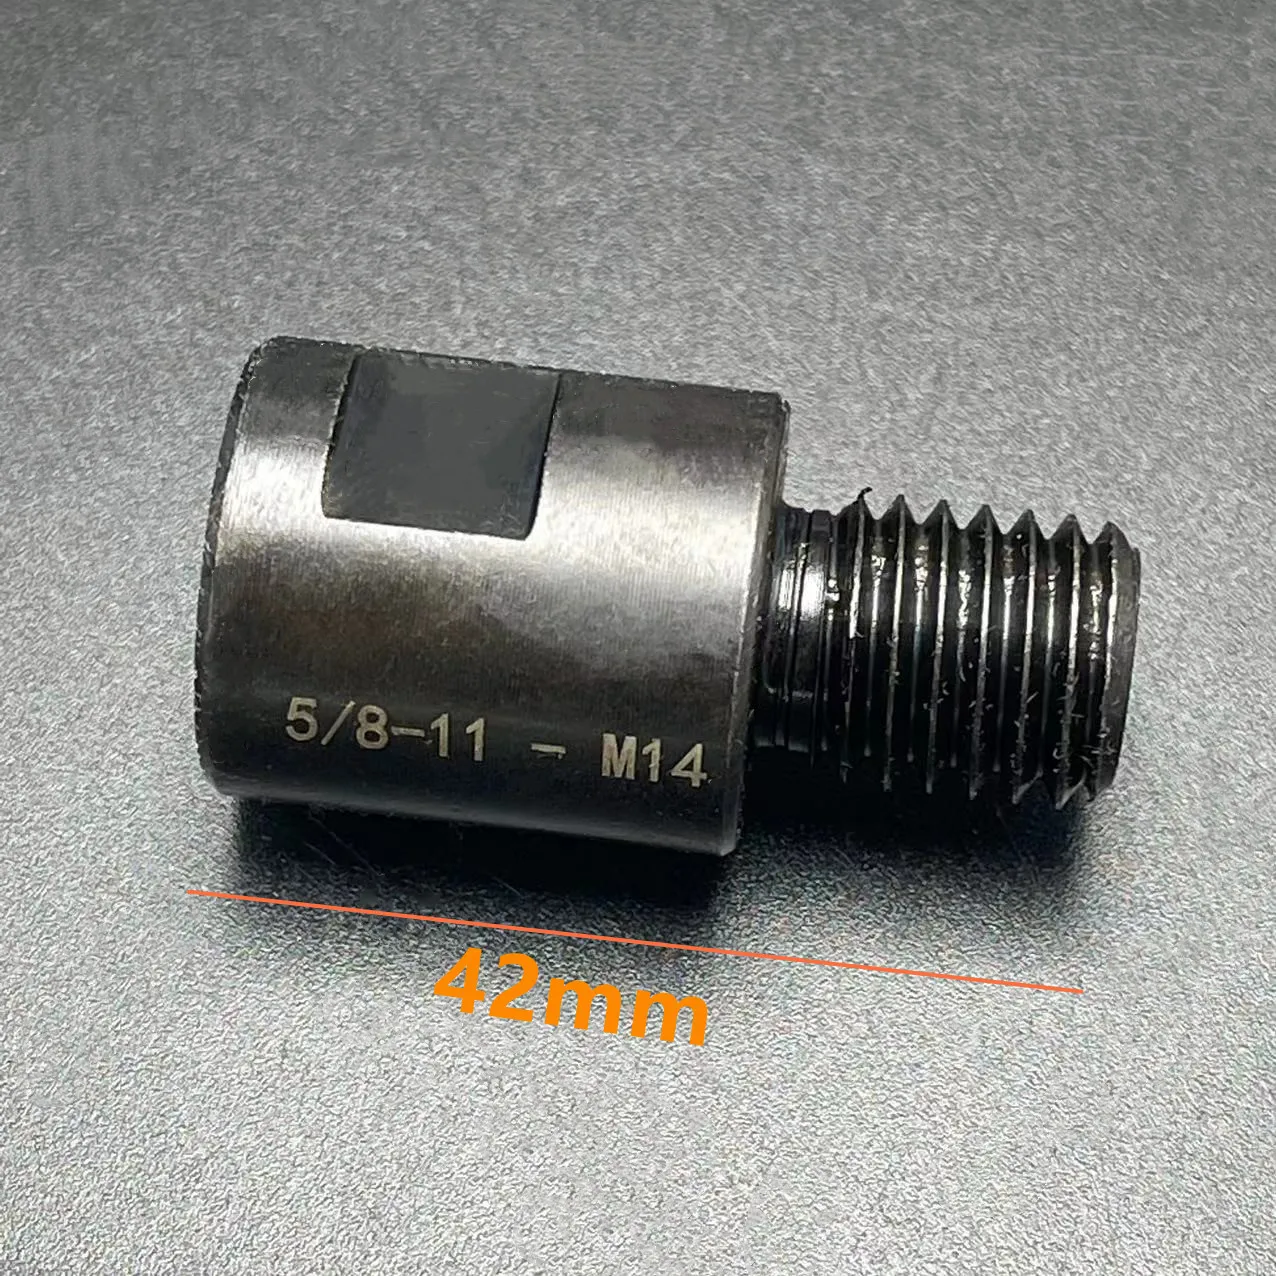 Angle Grinder Adapter M10 M14 5/8-11'' Thread Interface Connector Converter Adapter Angle Grinder Accessories Extension Tools